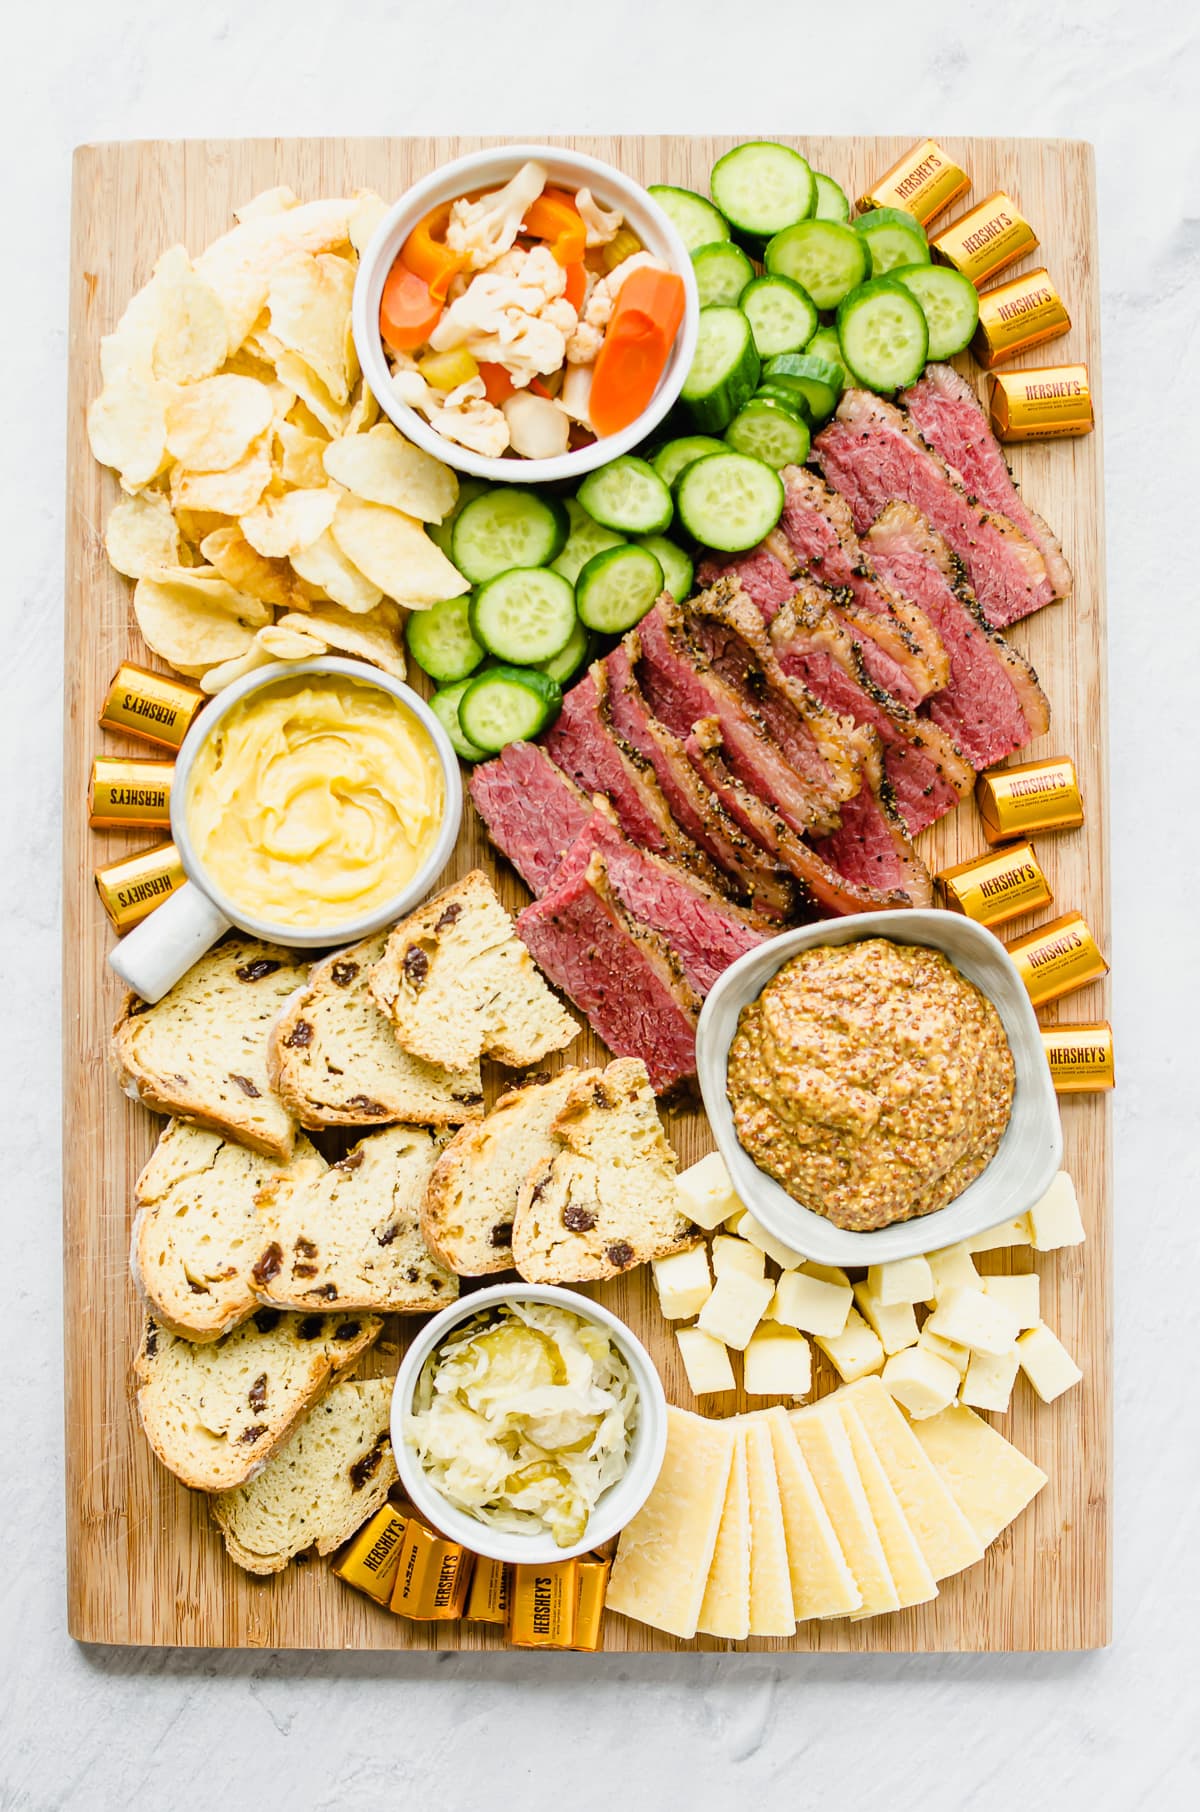 A St. Patrick's day themed snack board with corned beef, sauerkraut, soda bread, and other charcuterie items.